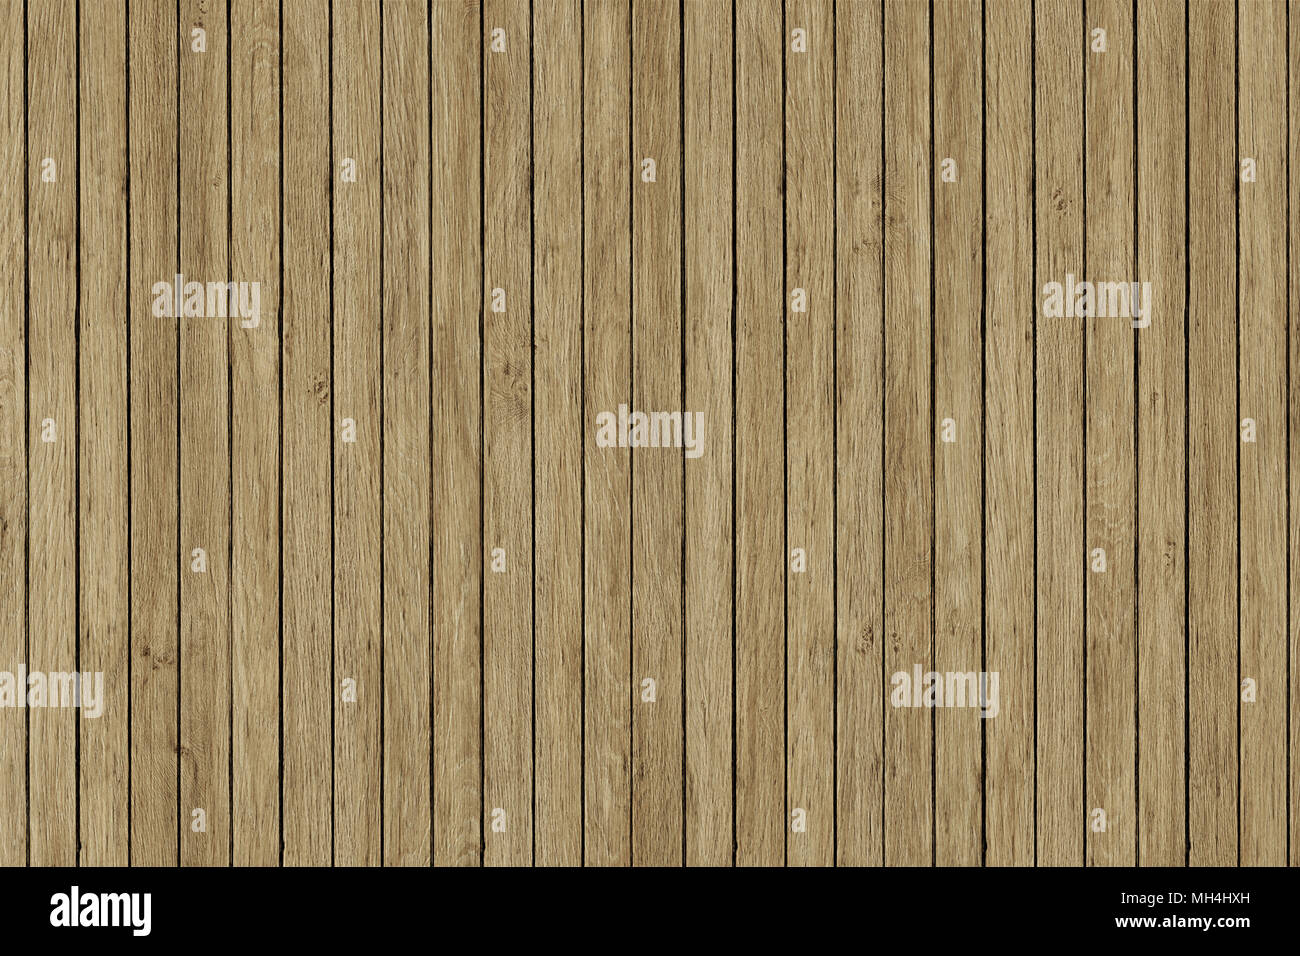 grunge wood panels, close up of wall made of wooden planks Stock Photo